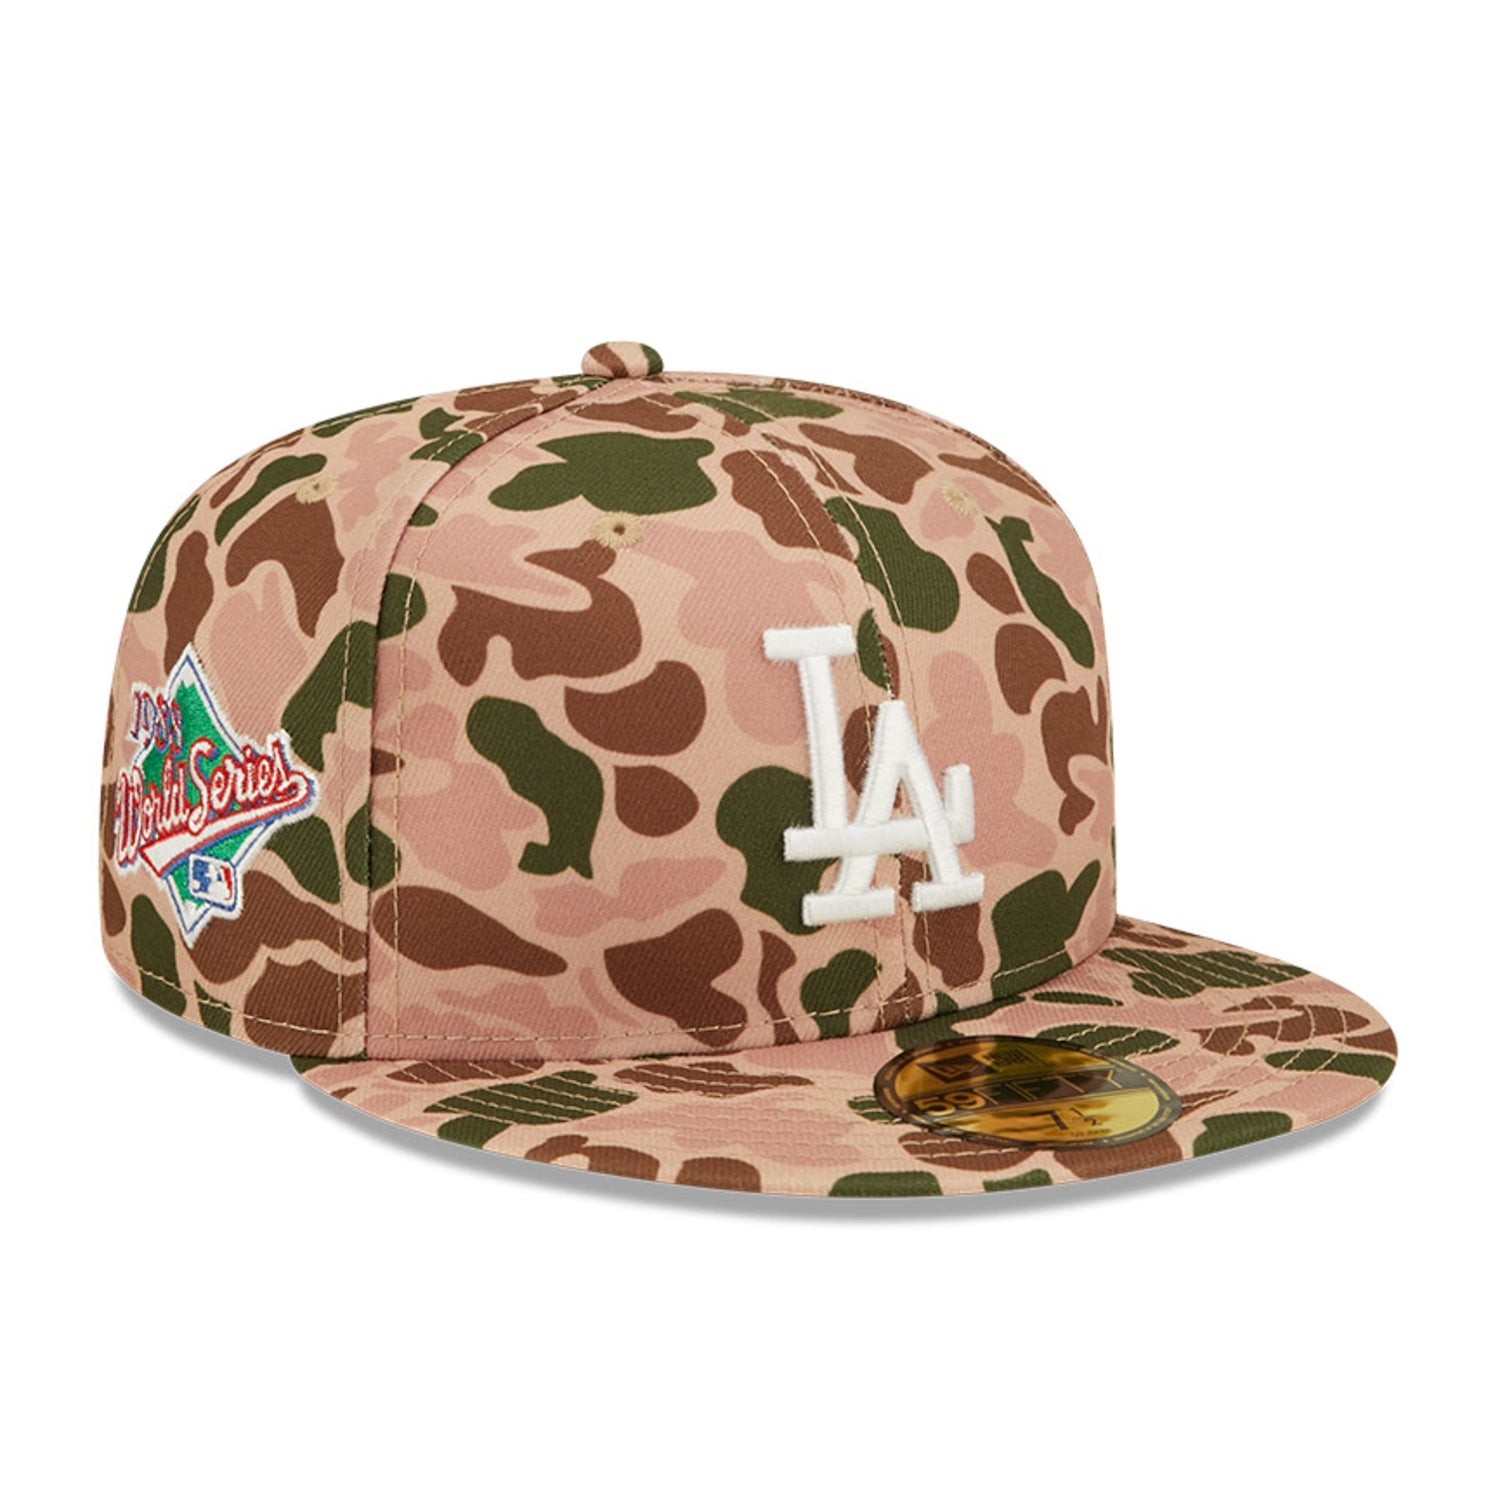 Los Angeles Dodgers On Field Baseball Cap Hat Camouflage 59Fifty